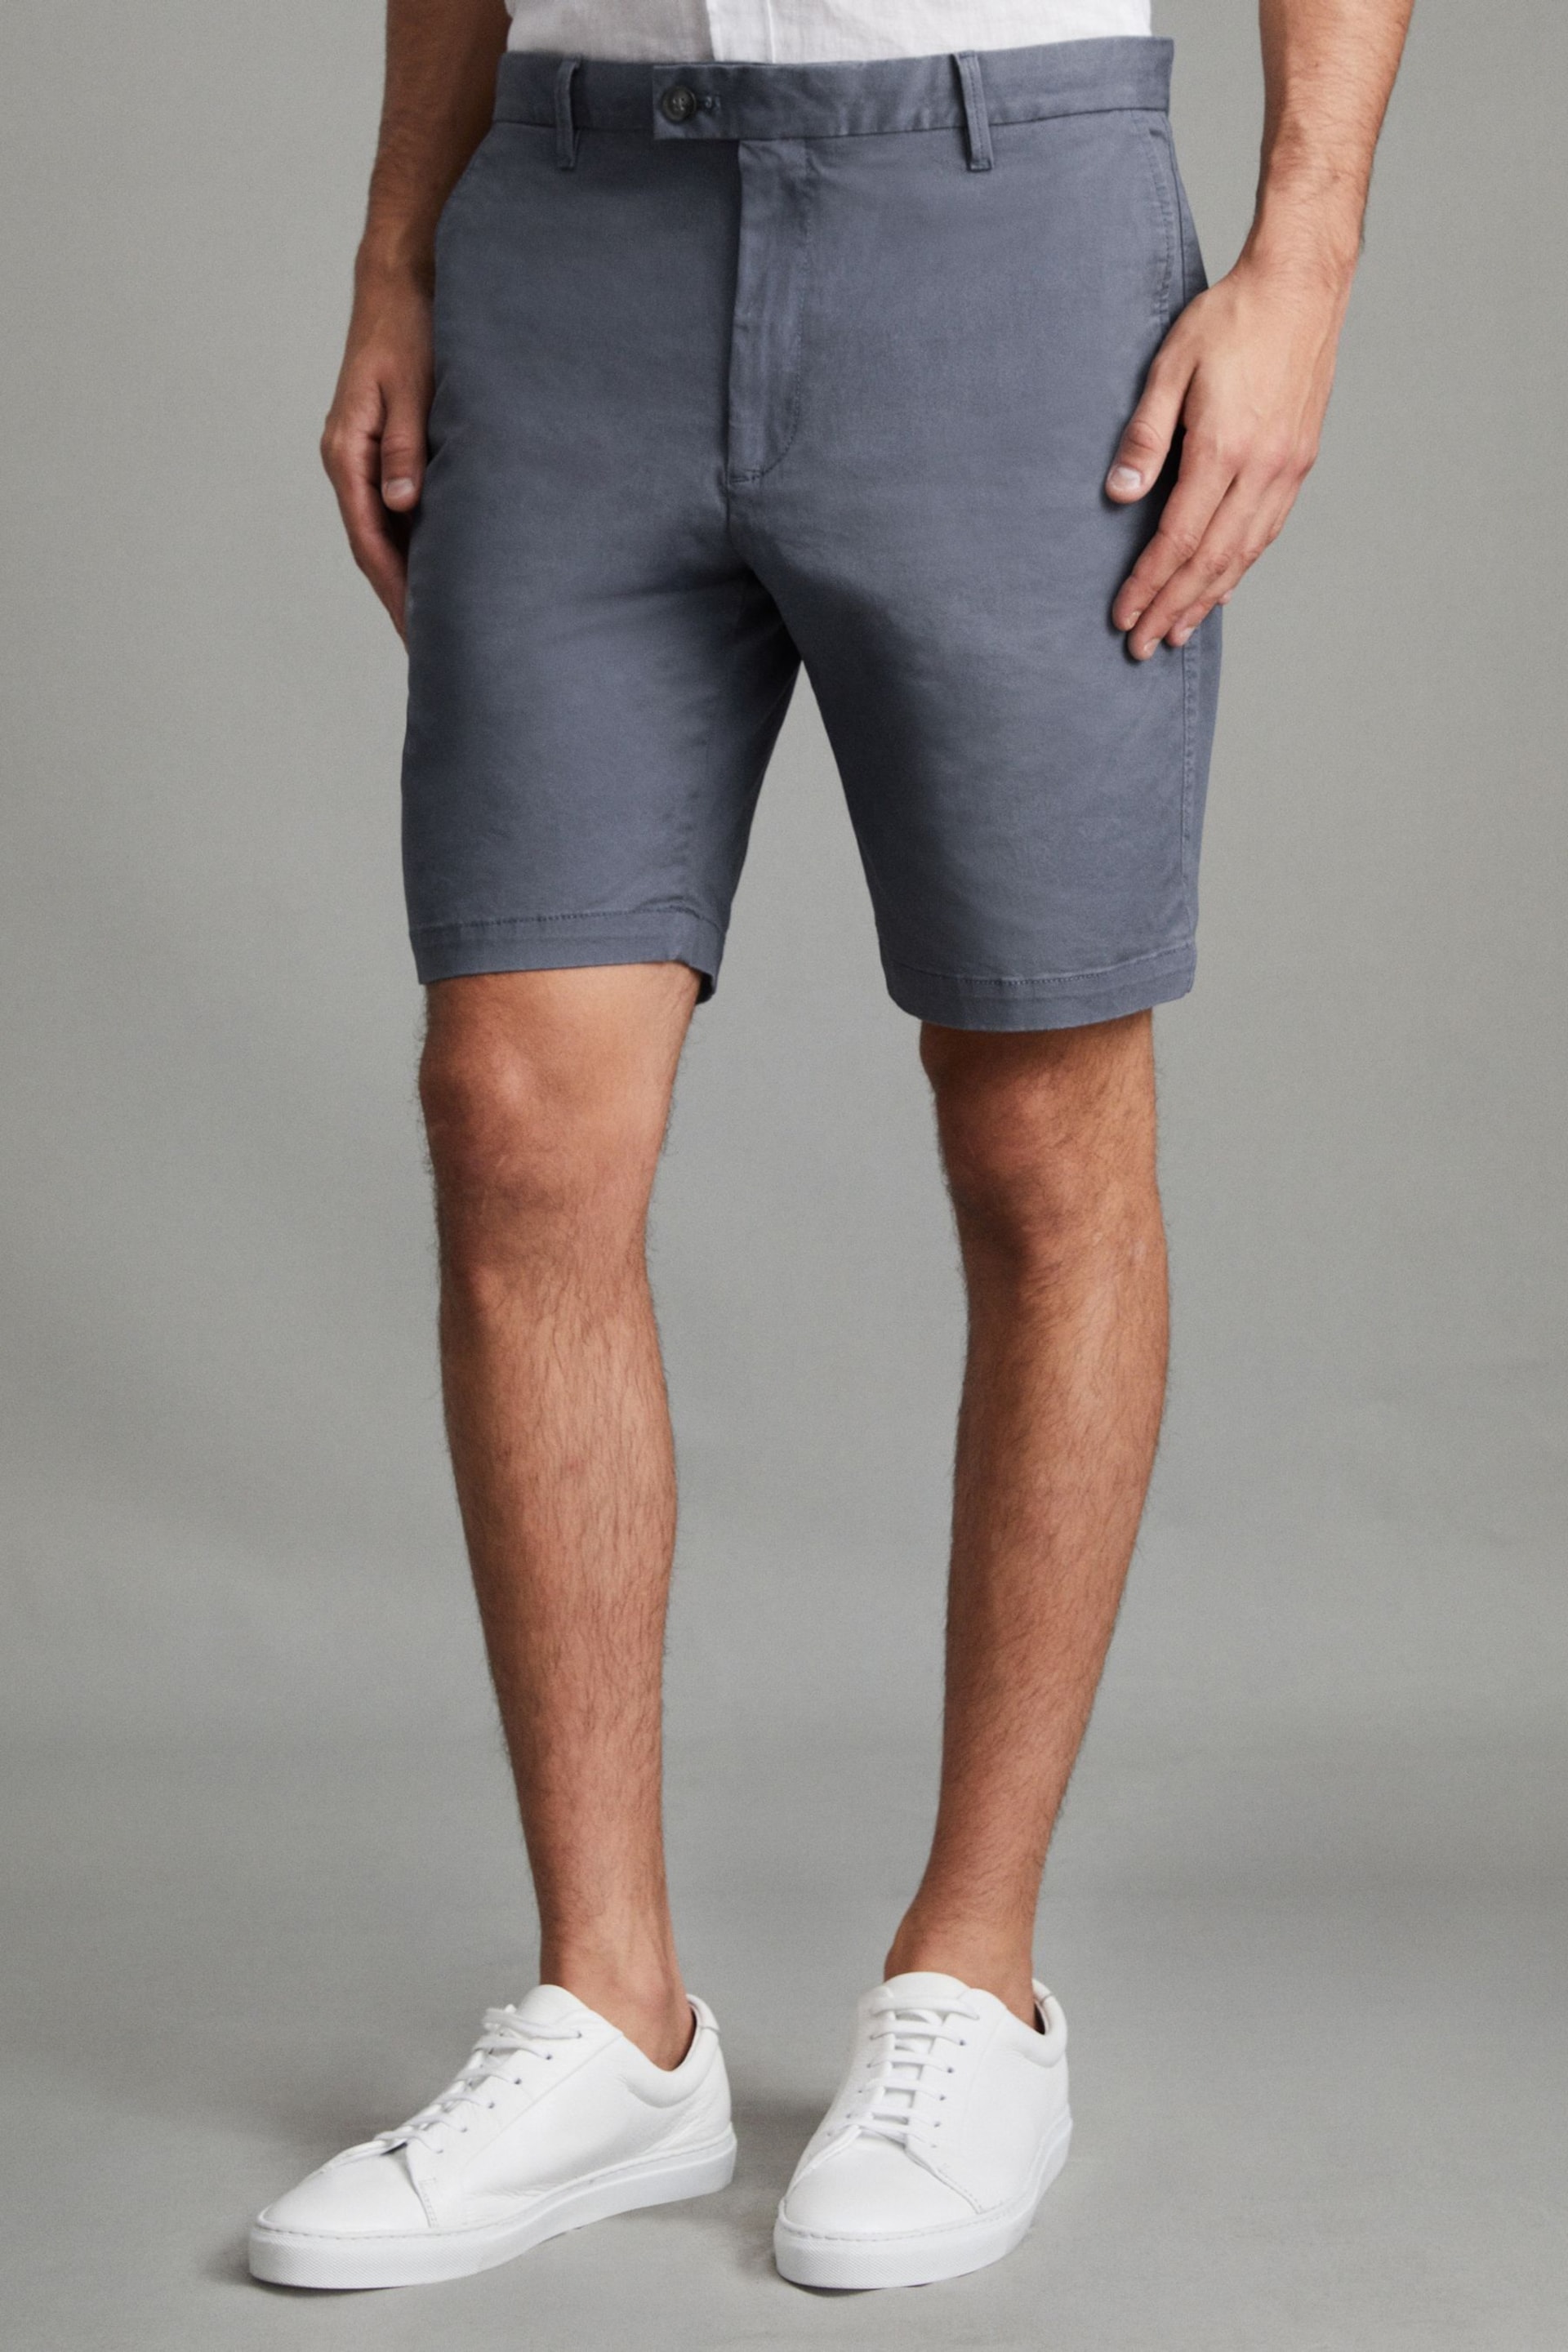 Reiss Airforce Blue Wicket Modern Fit Cotton Blend Chino Shorts - Image 1 of 7